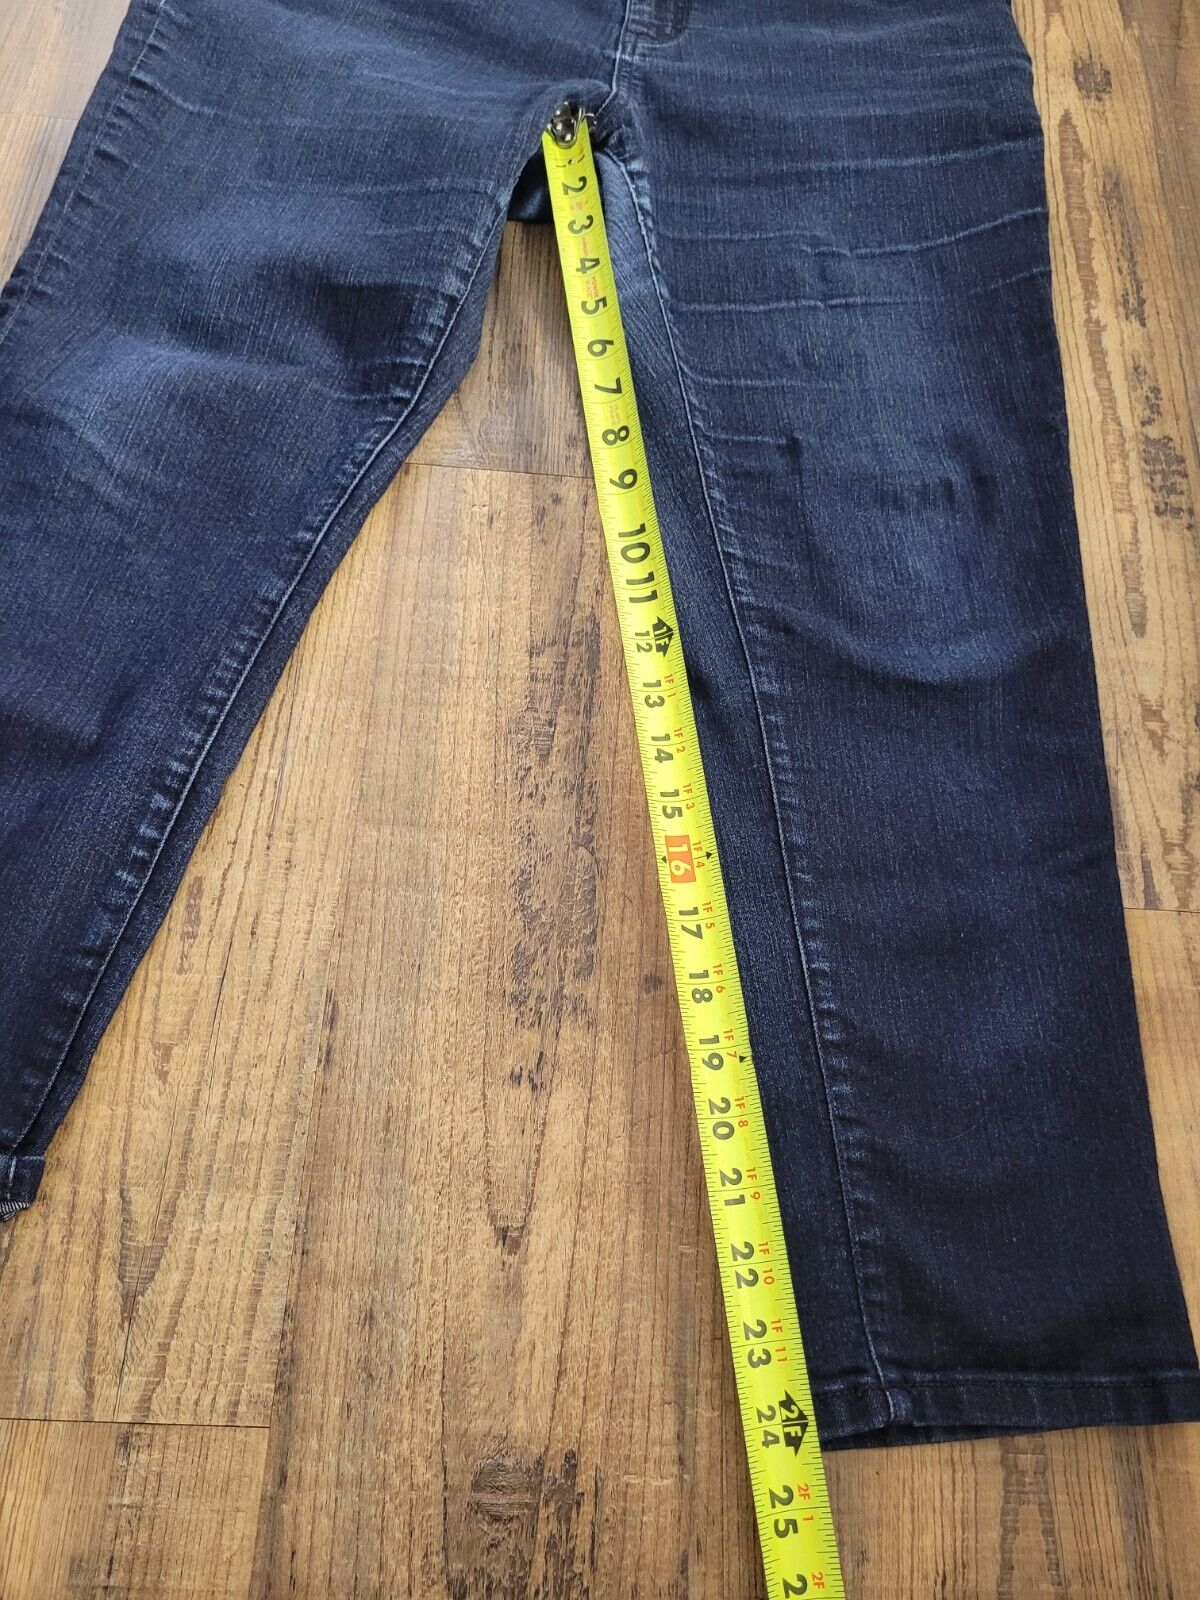 KATE SPADE NEW YORK BROOME STREET JEANS SIZE 32 - image 3